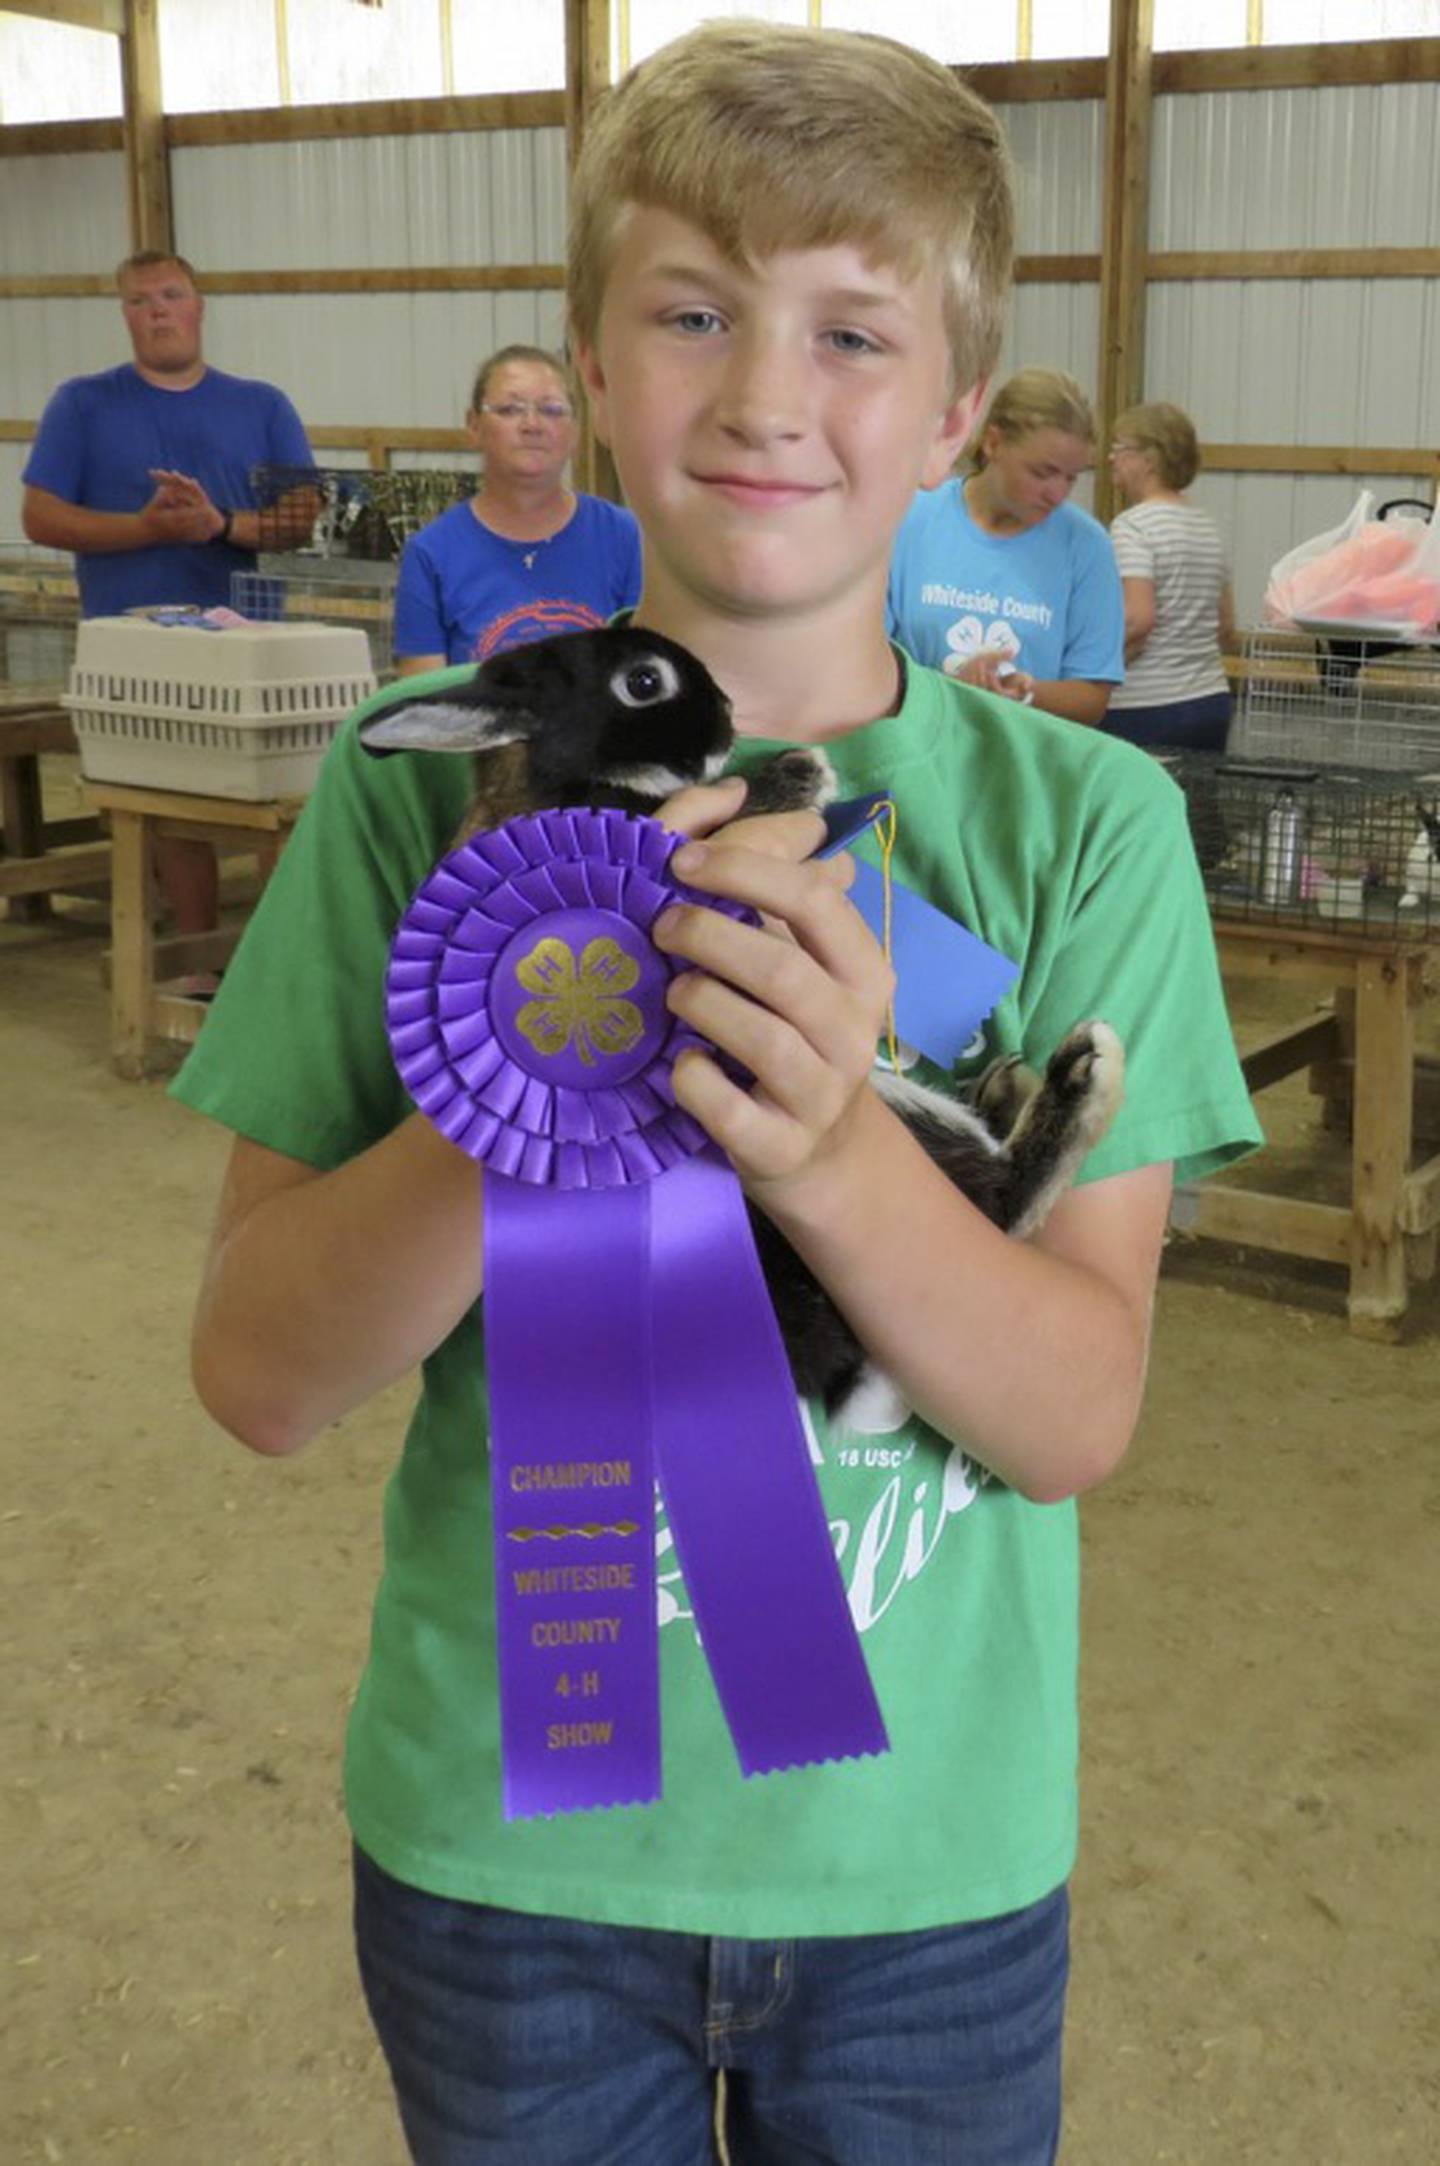 Mason Camps of the Genesee Hillbillies 4-H Club of Sterling at the 4-H Rabbit Show held on Friday, July 8